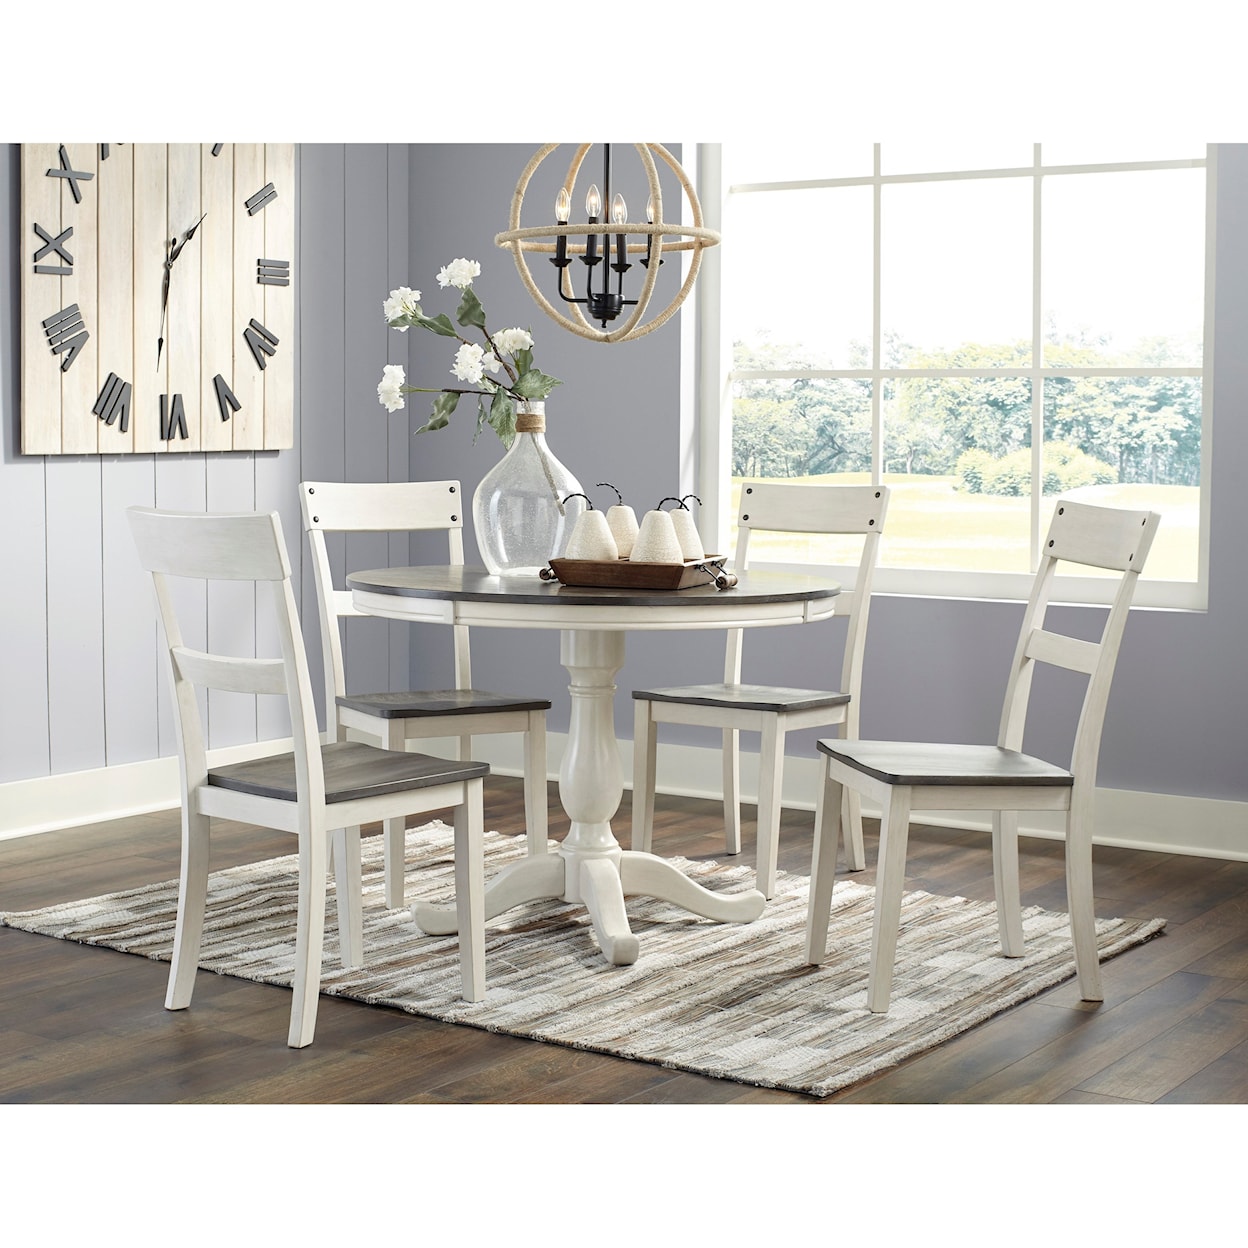 Benchcraft Nelling 5-Piece Round Dining Table Set